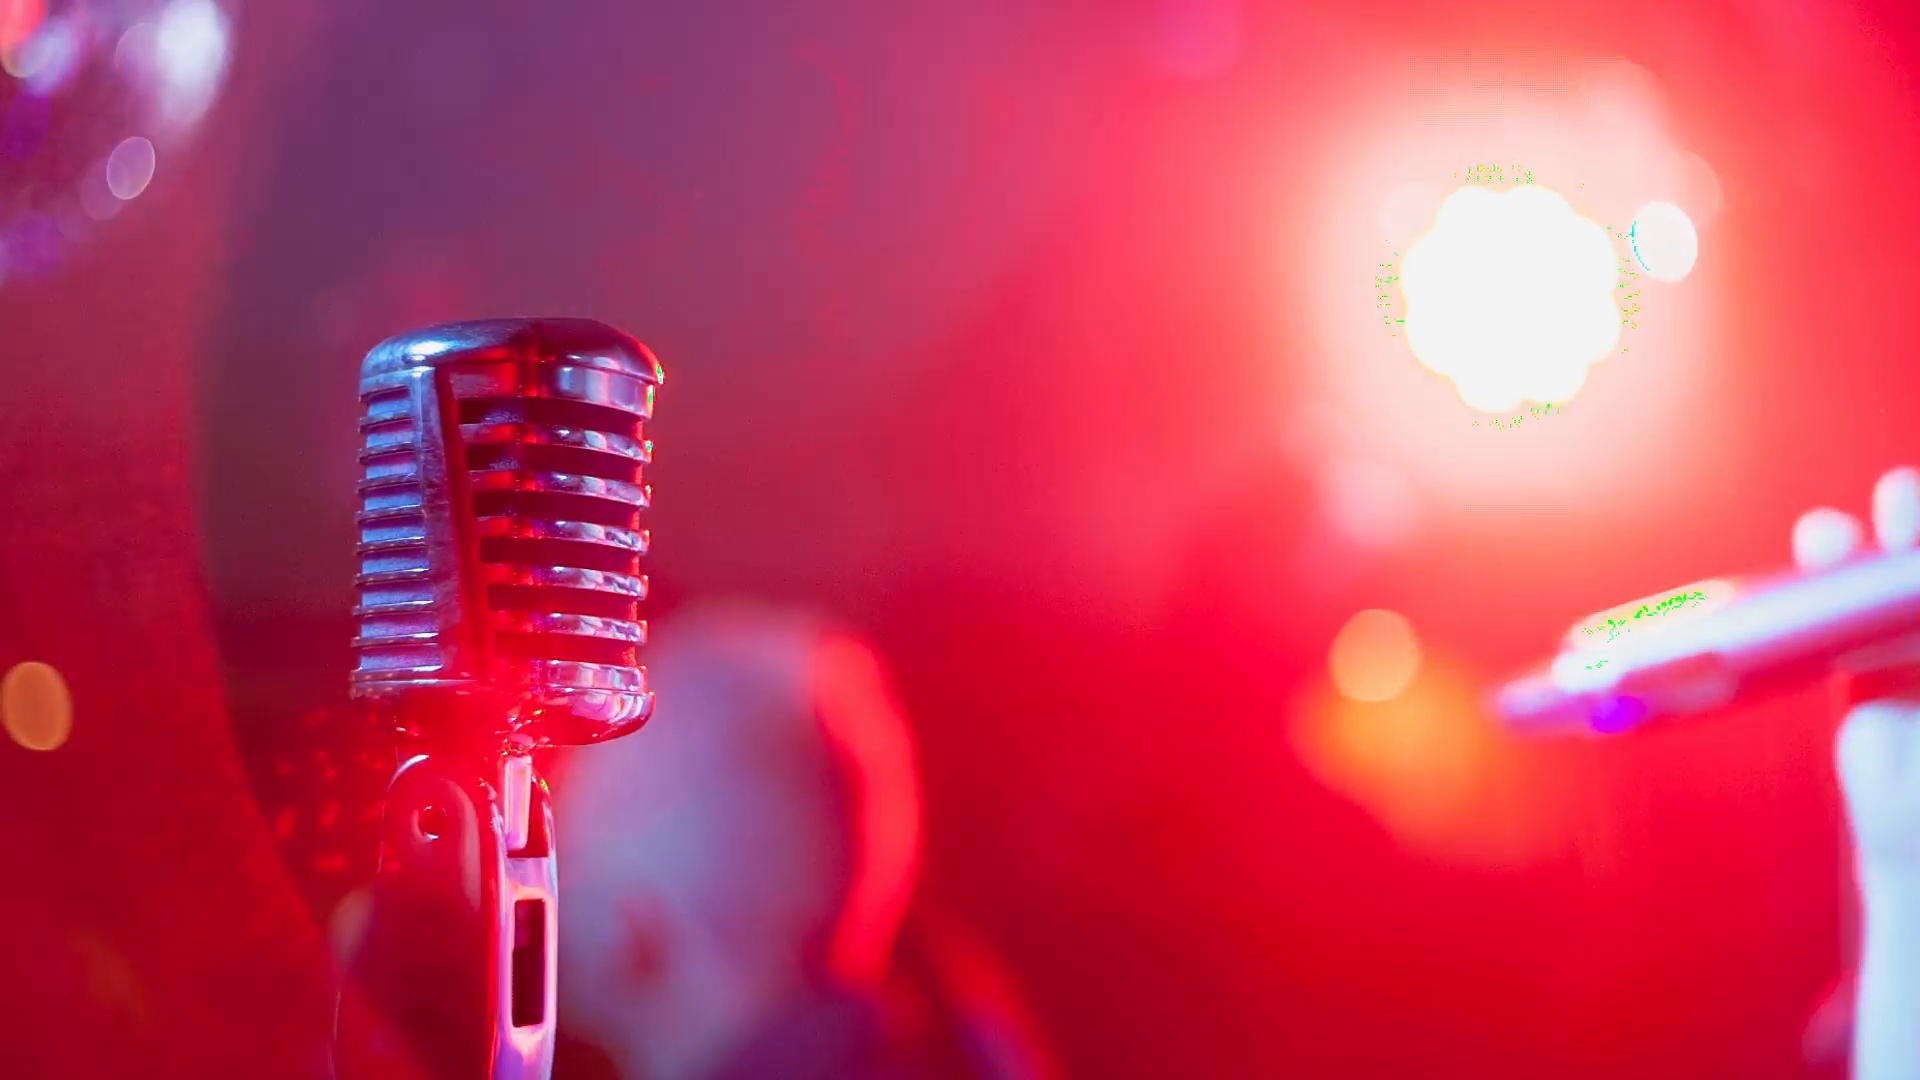 Abstract Background Live Music With Vintage Microphone And